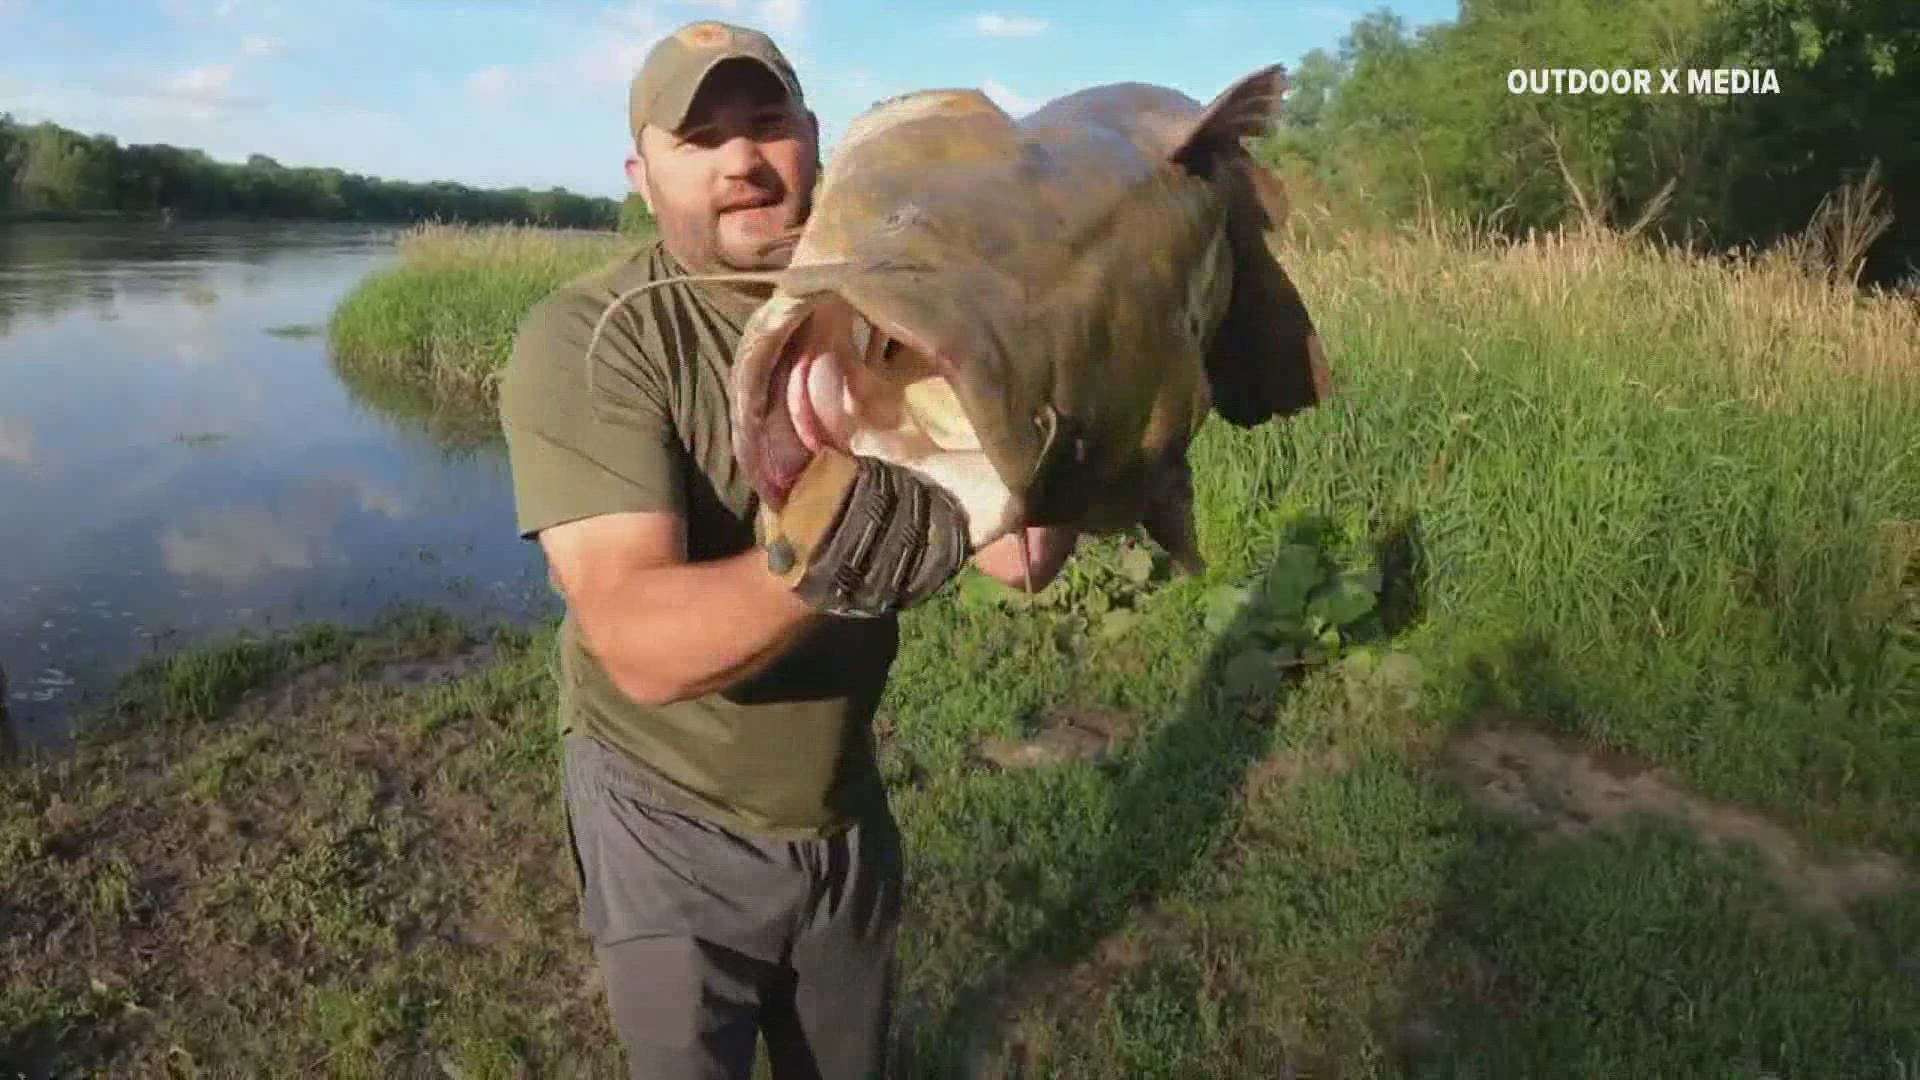 The flathead catfish reeled in Saturday was only 10 pounds short of Iowa's record.